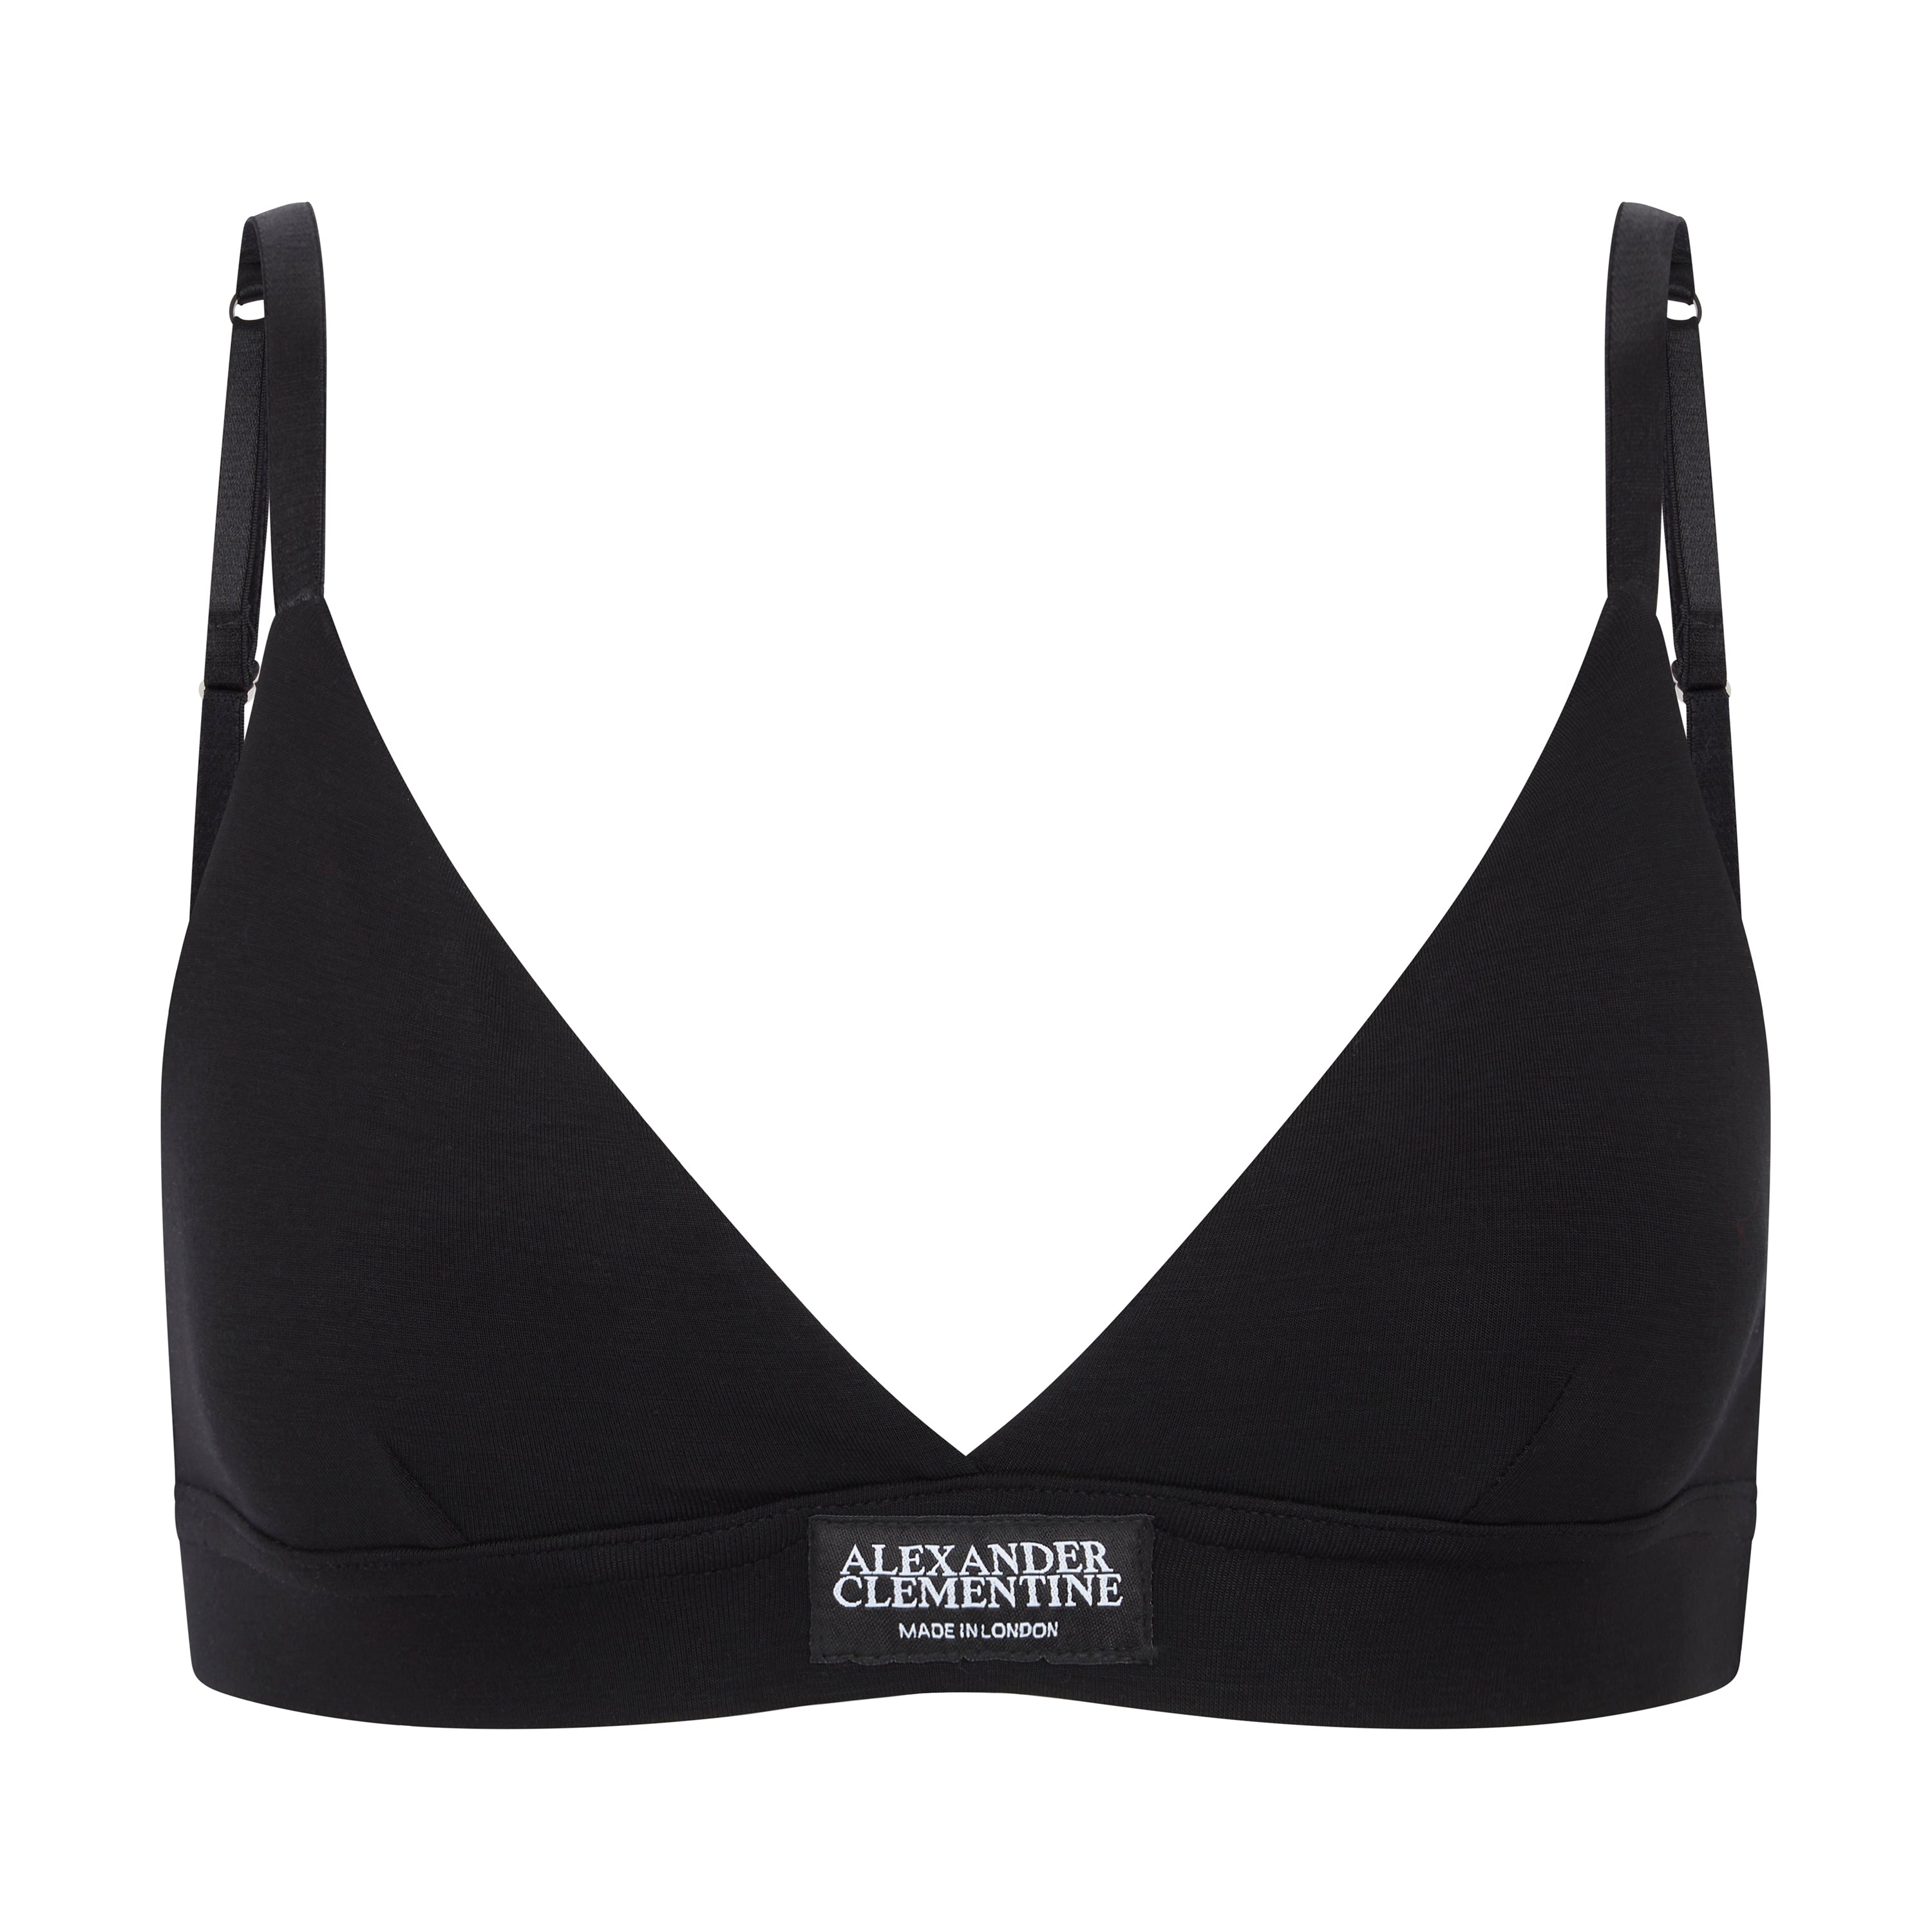 SeaCell™ Triangle Bralette